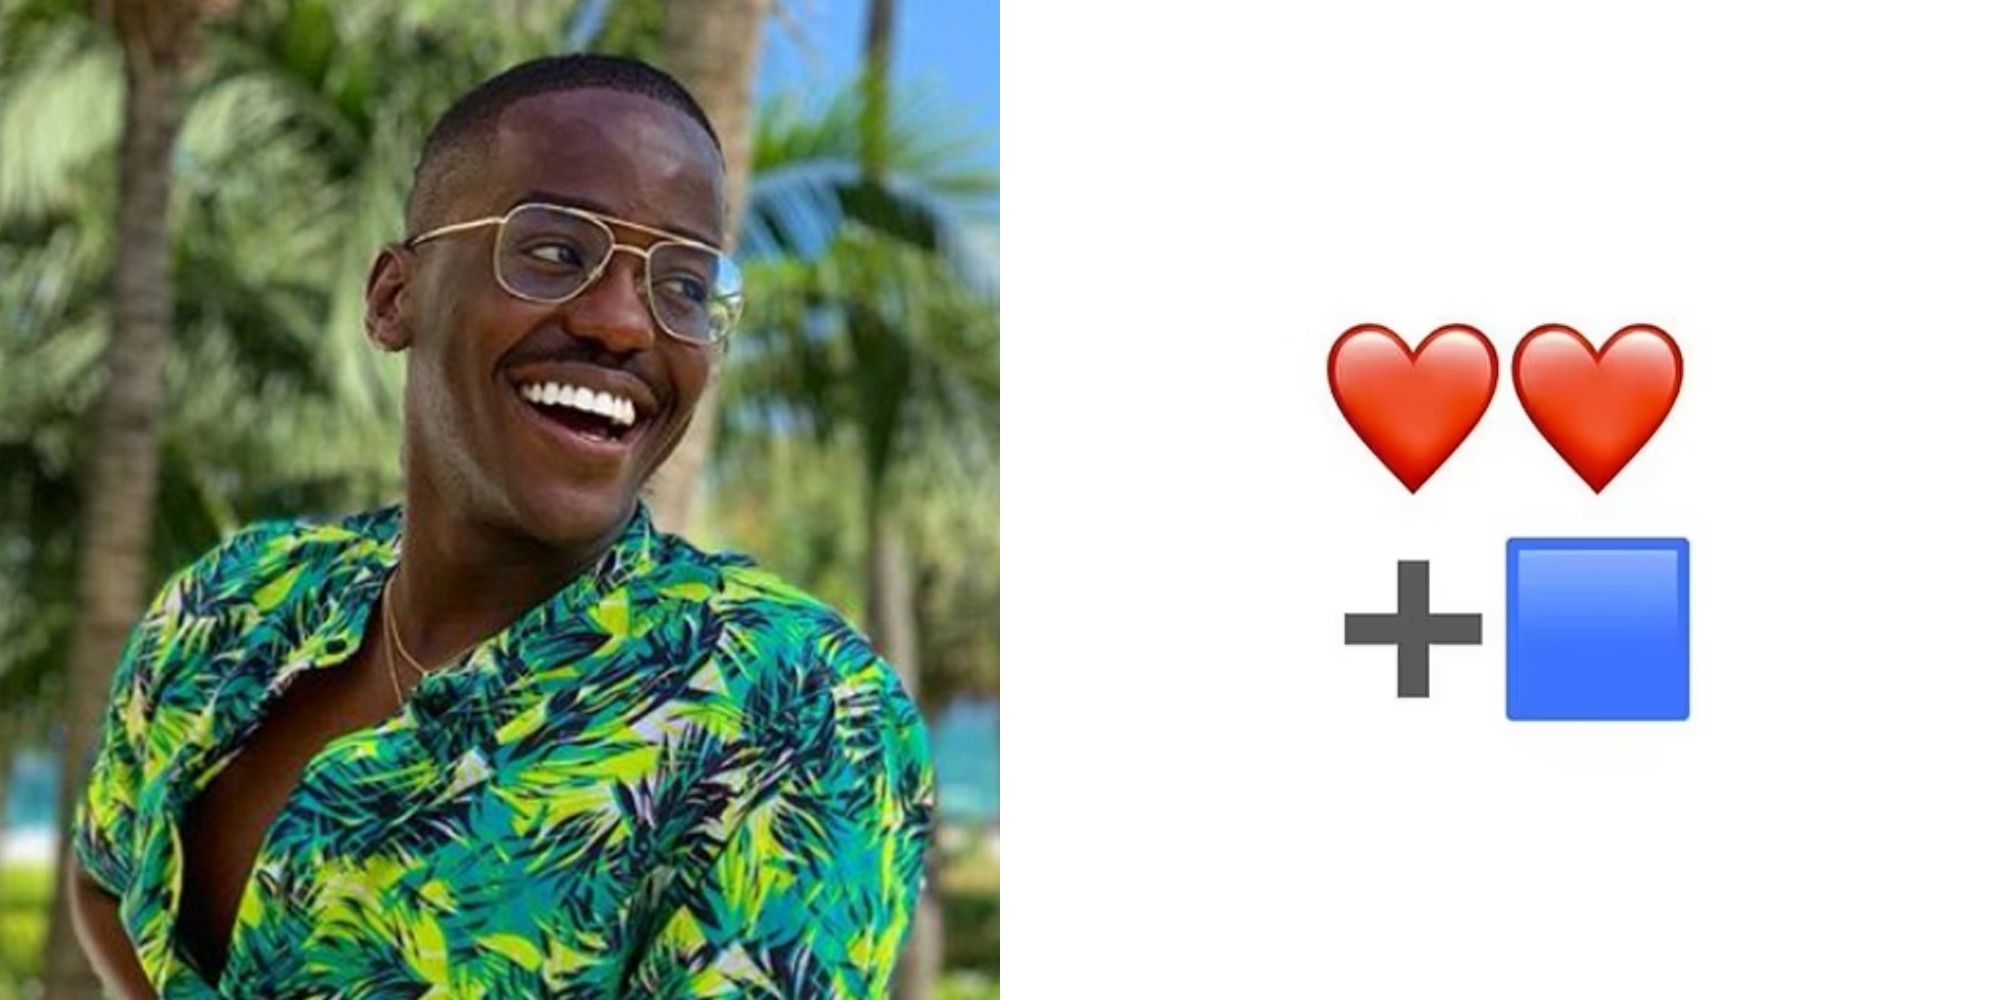 Split image of Gatwa smiling, and emojis of two hearts, a plus sign and blue box for Doctor Who